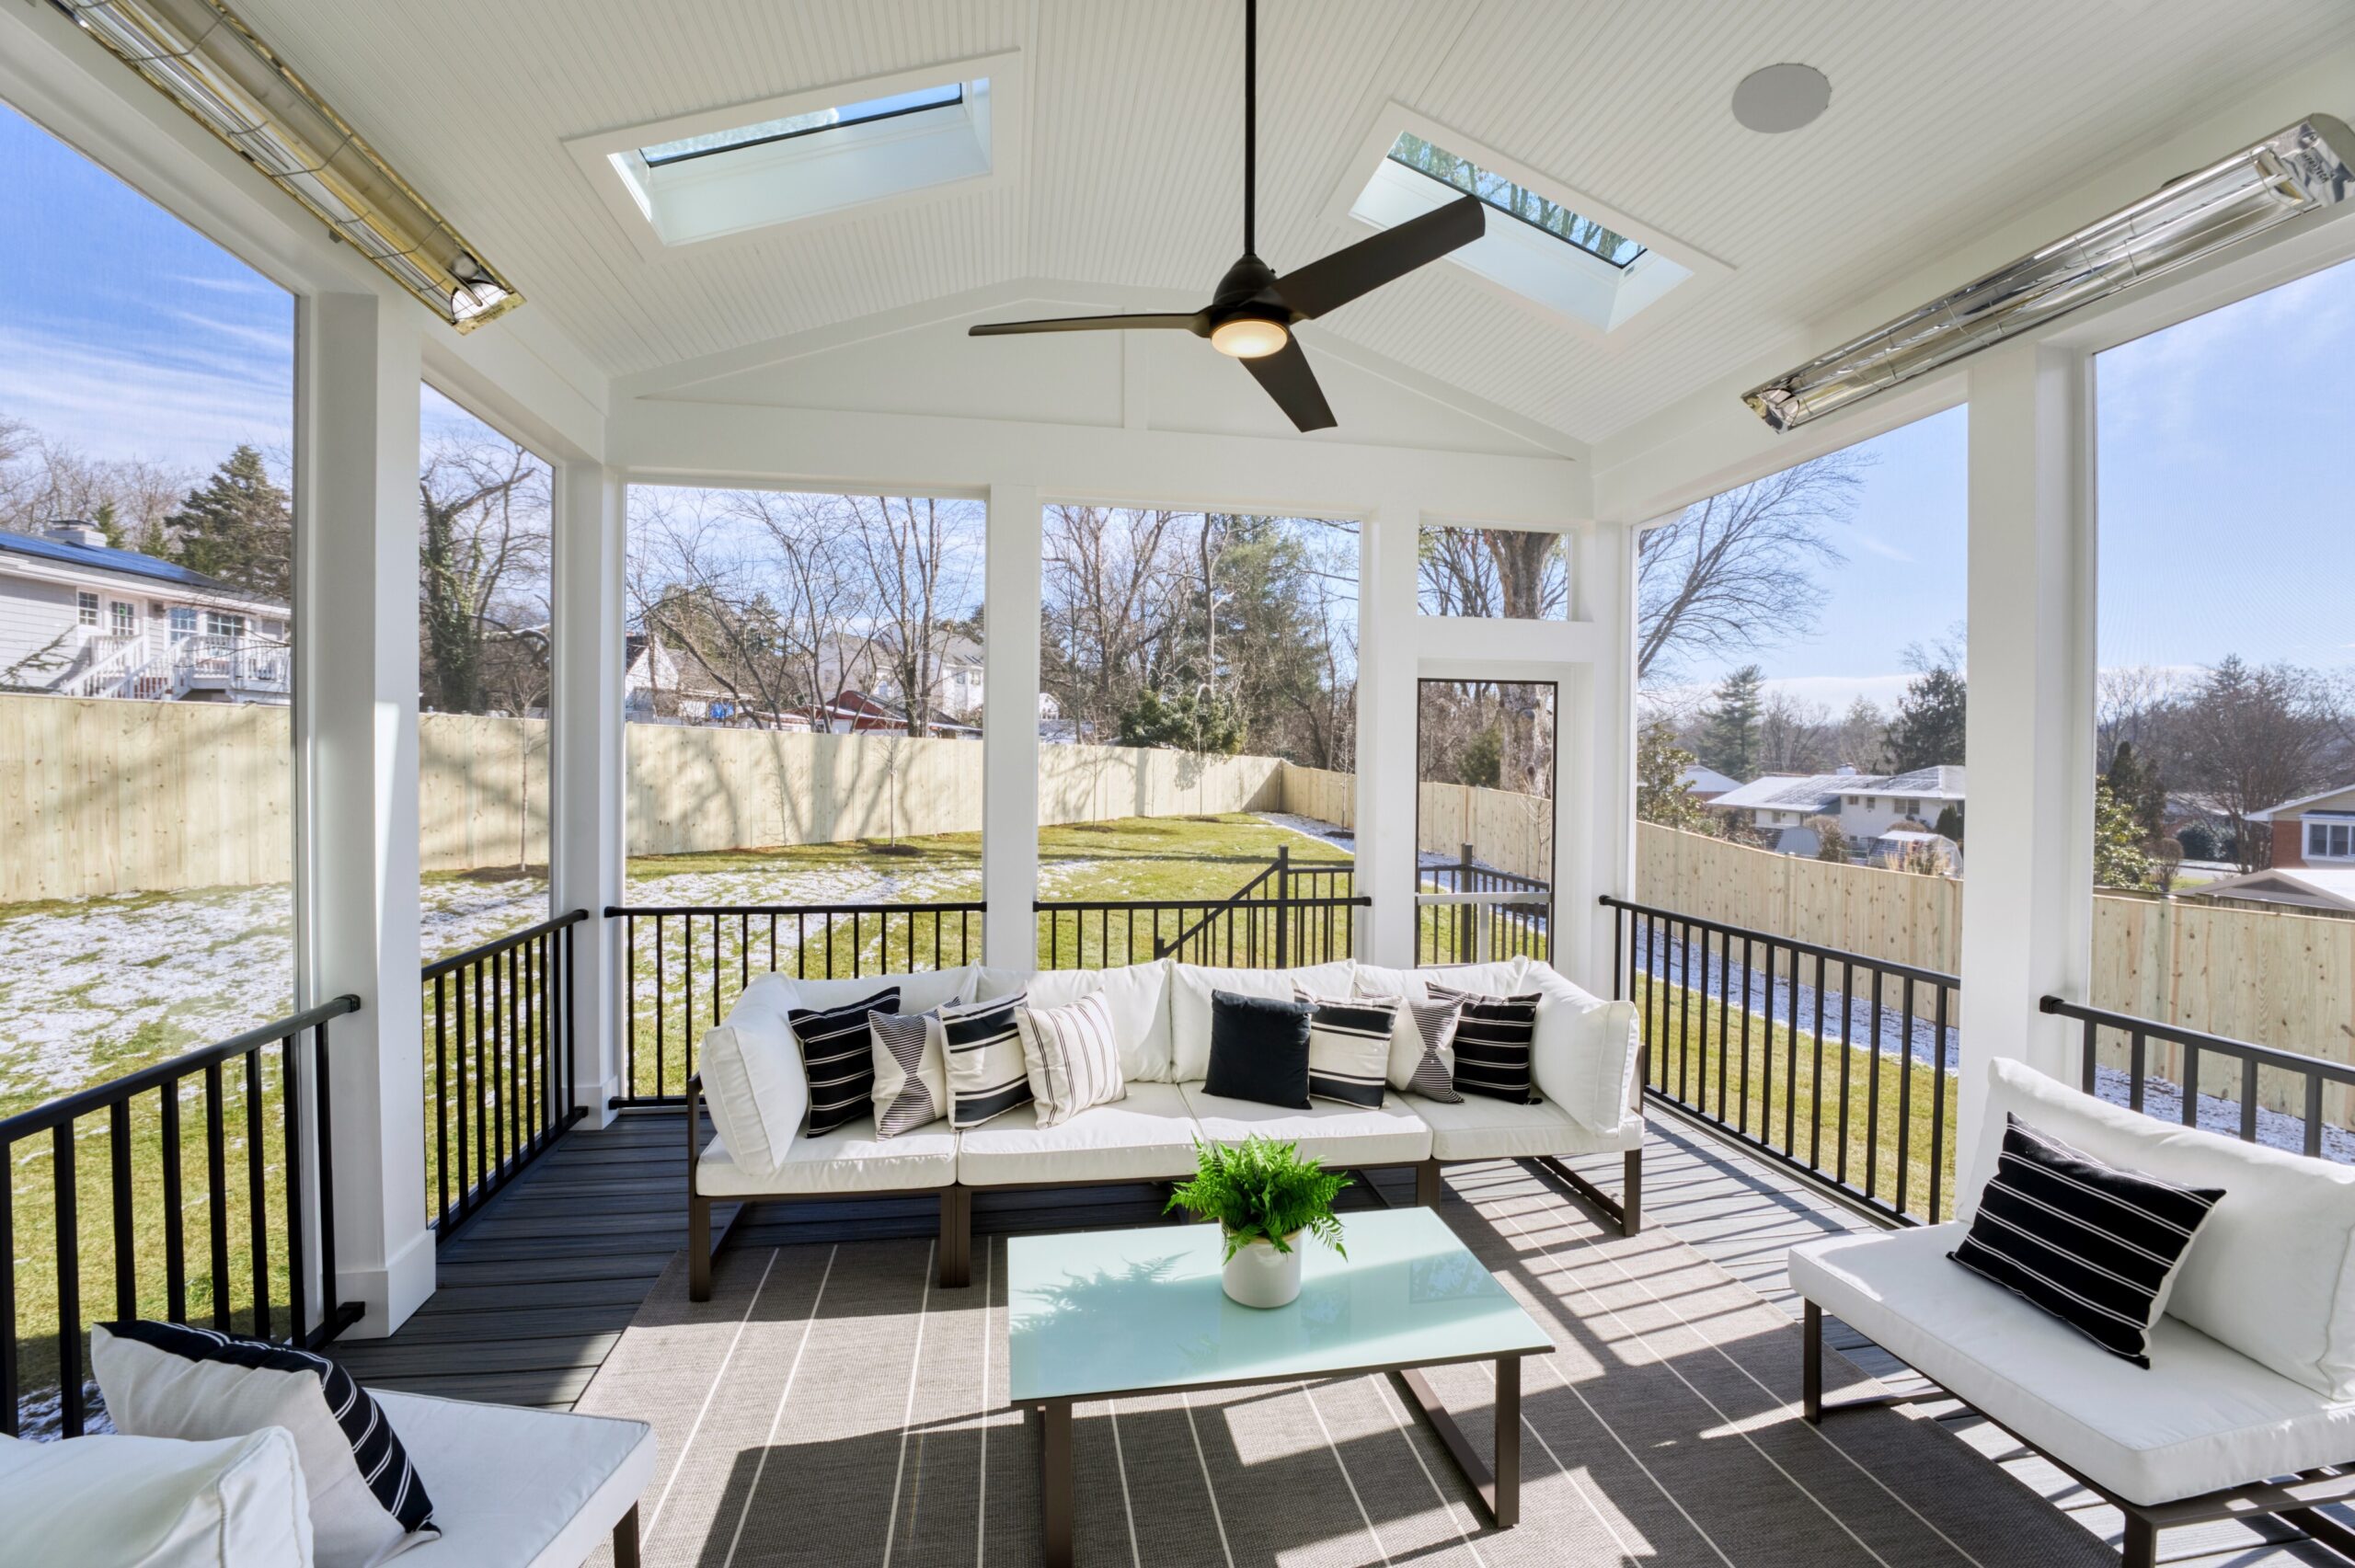 Professional interior photo of 1624 Dempsey St, McLean, VA - showing the inside of the screened porch looking out toward the fenced backyard, skylights, heaters, and ceiling fan